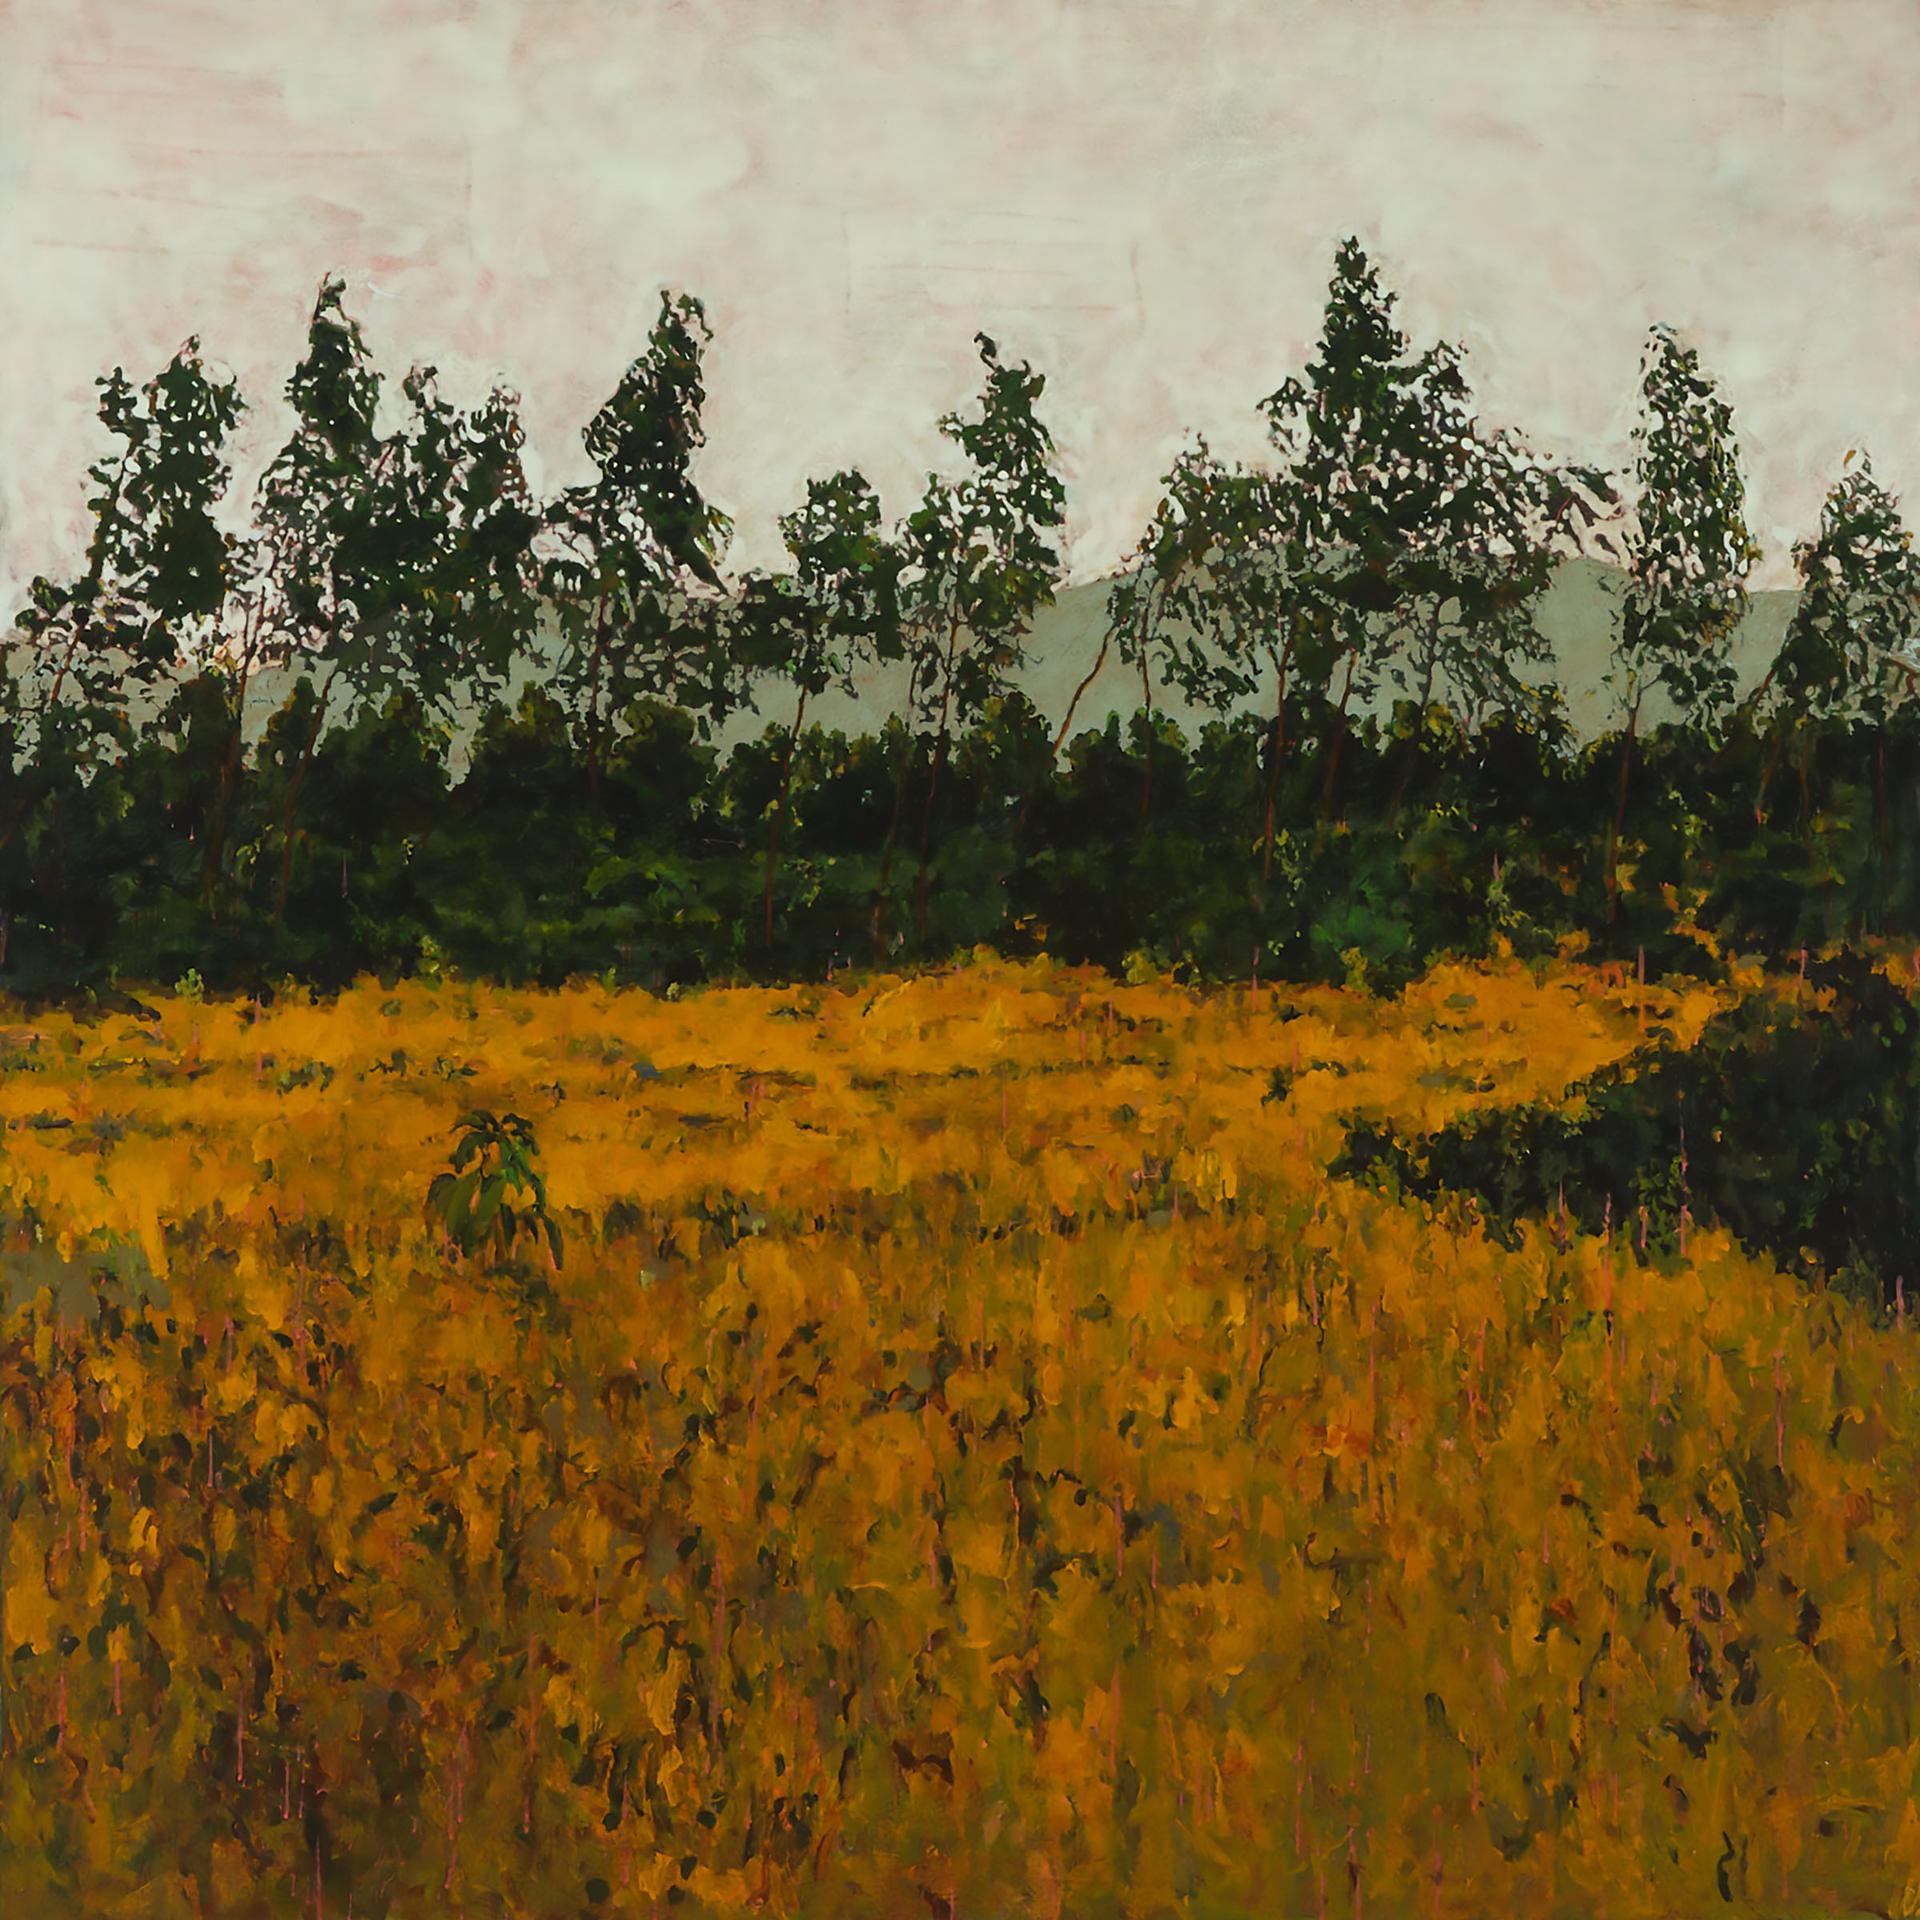 Sentinels By The Runway, 1999 by artist Bill Macdonnell